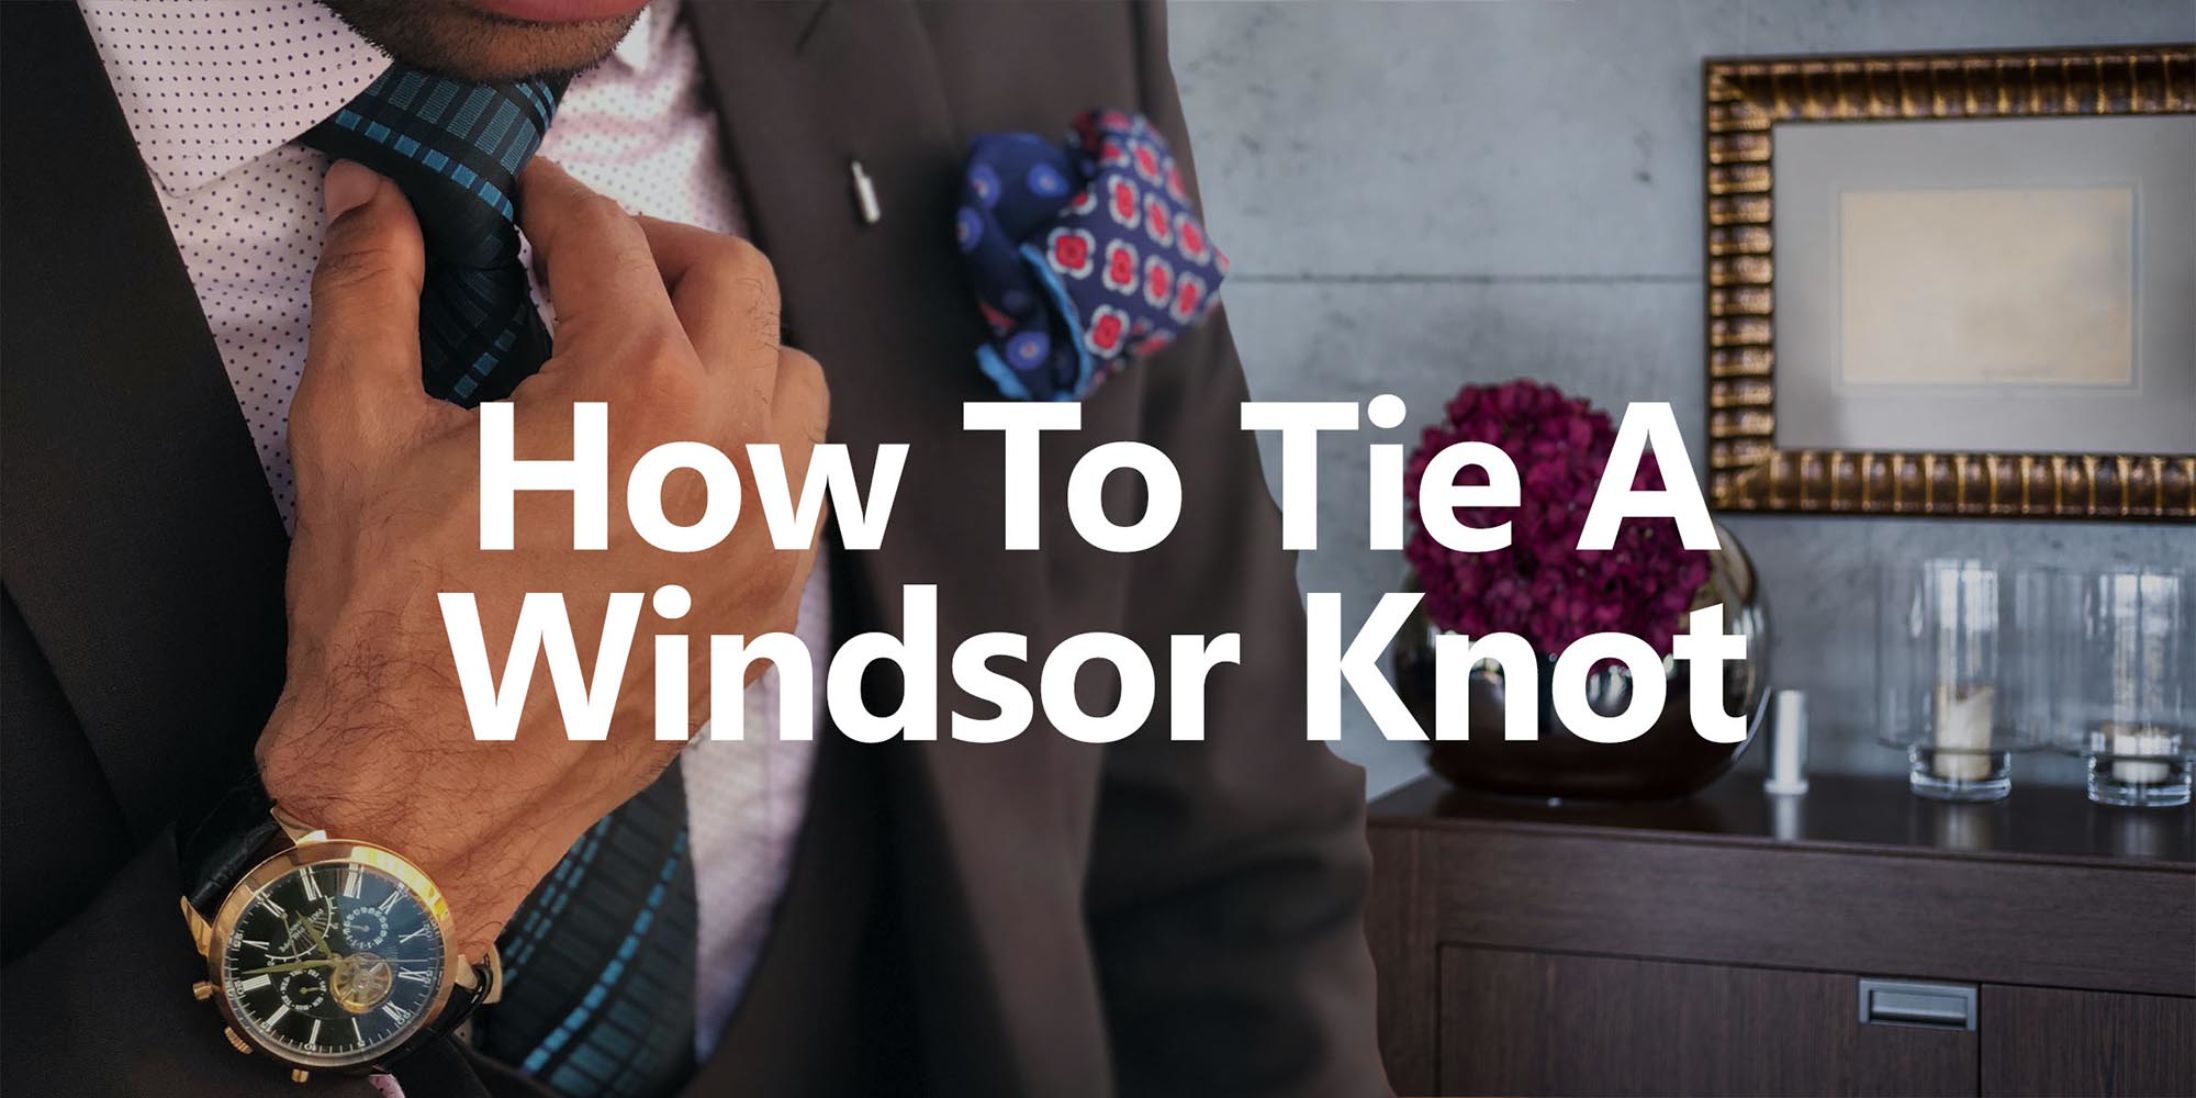 How to tie a Windsor Knot